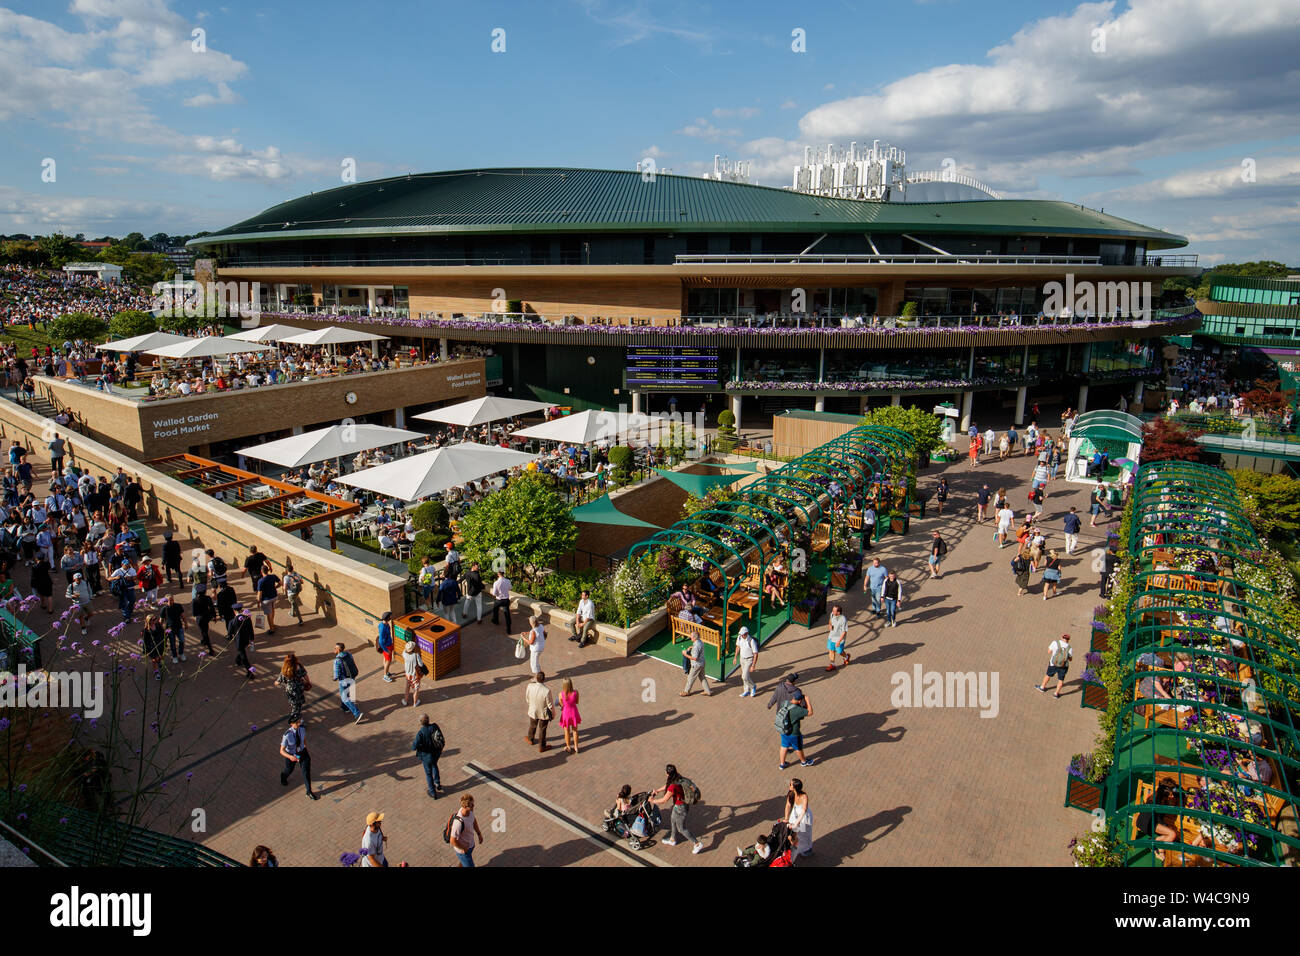 General View of Walled Garden Food Court and No.1 Court from the roof of Media Broadcast Centre. The Championships 2019. Held at The All England Lawn Stock Photo